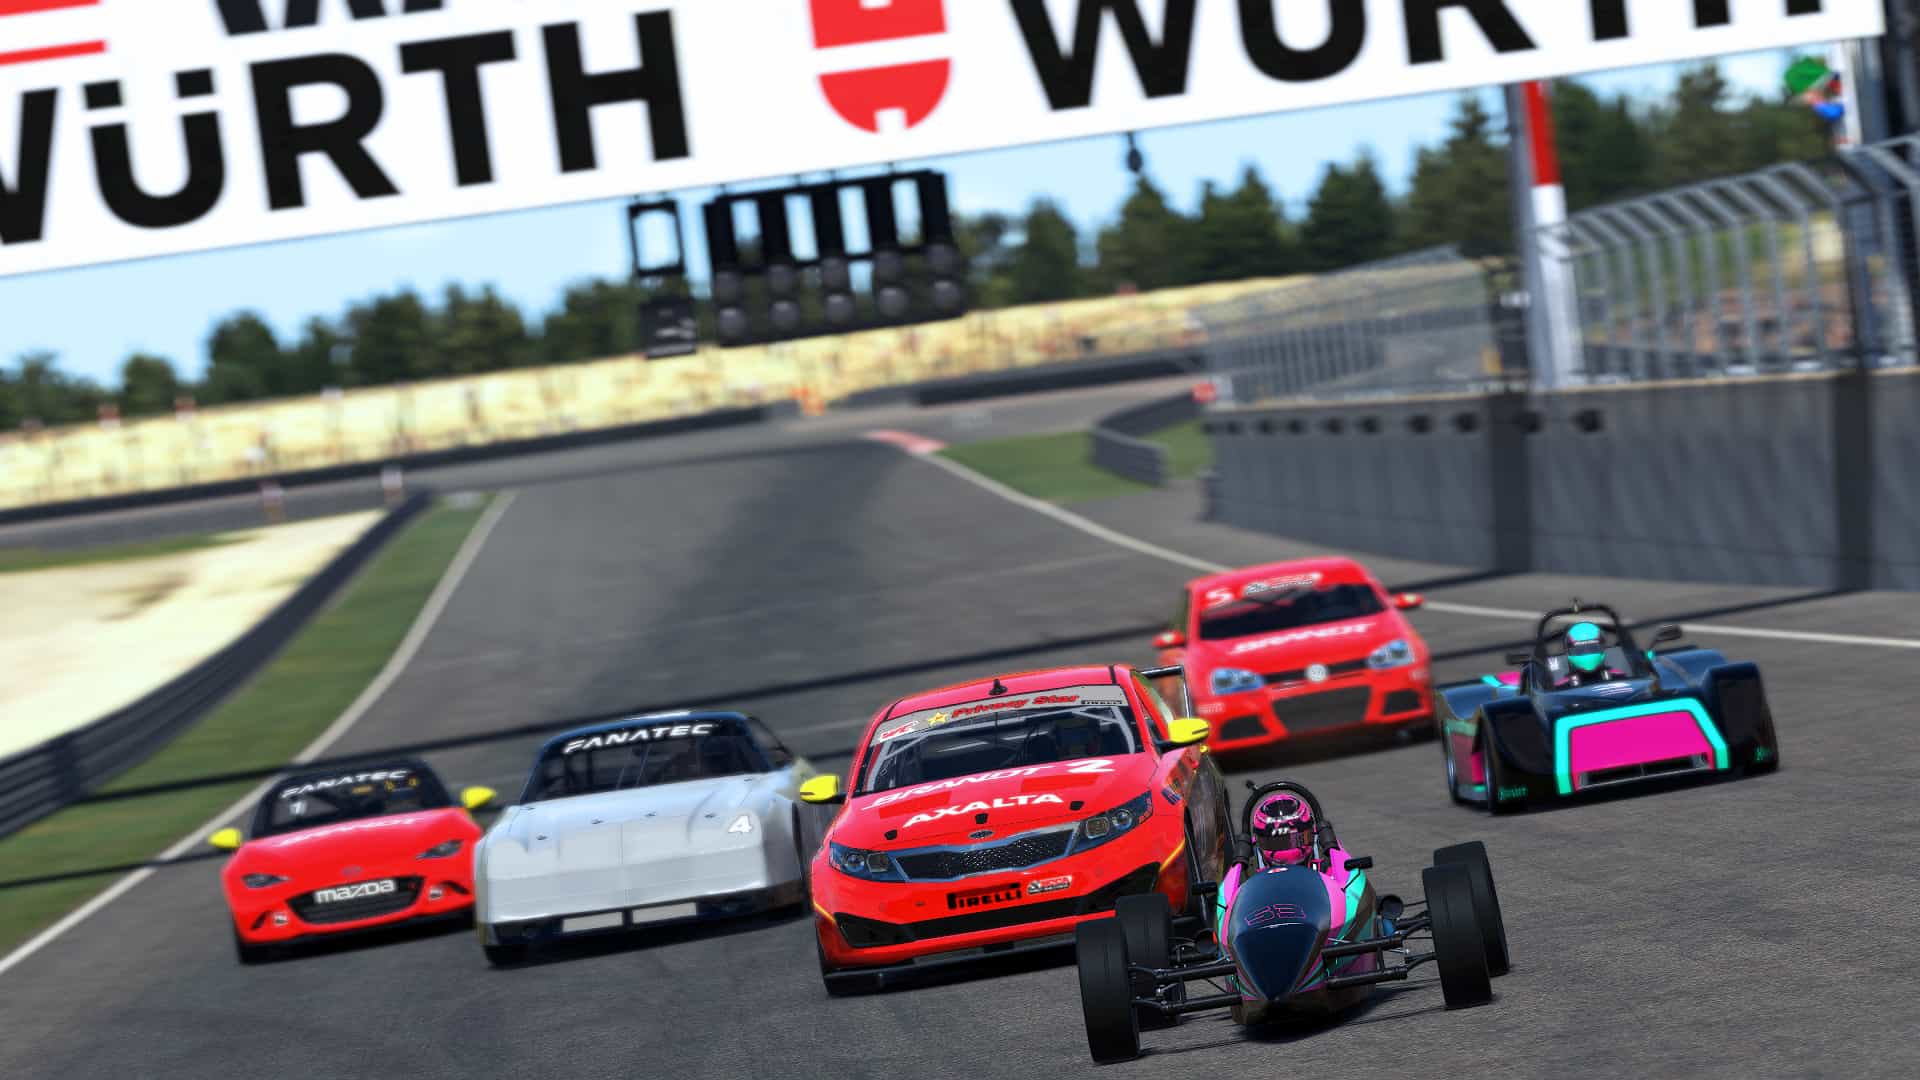 All the included content with a base subscription to iRacing